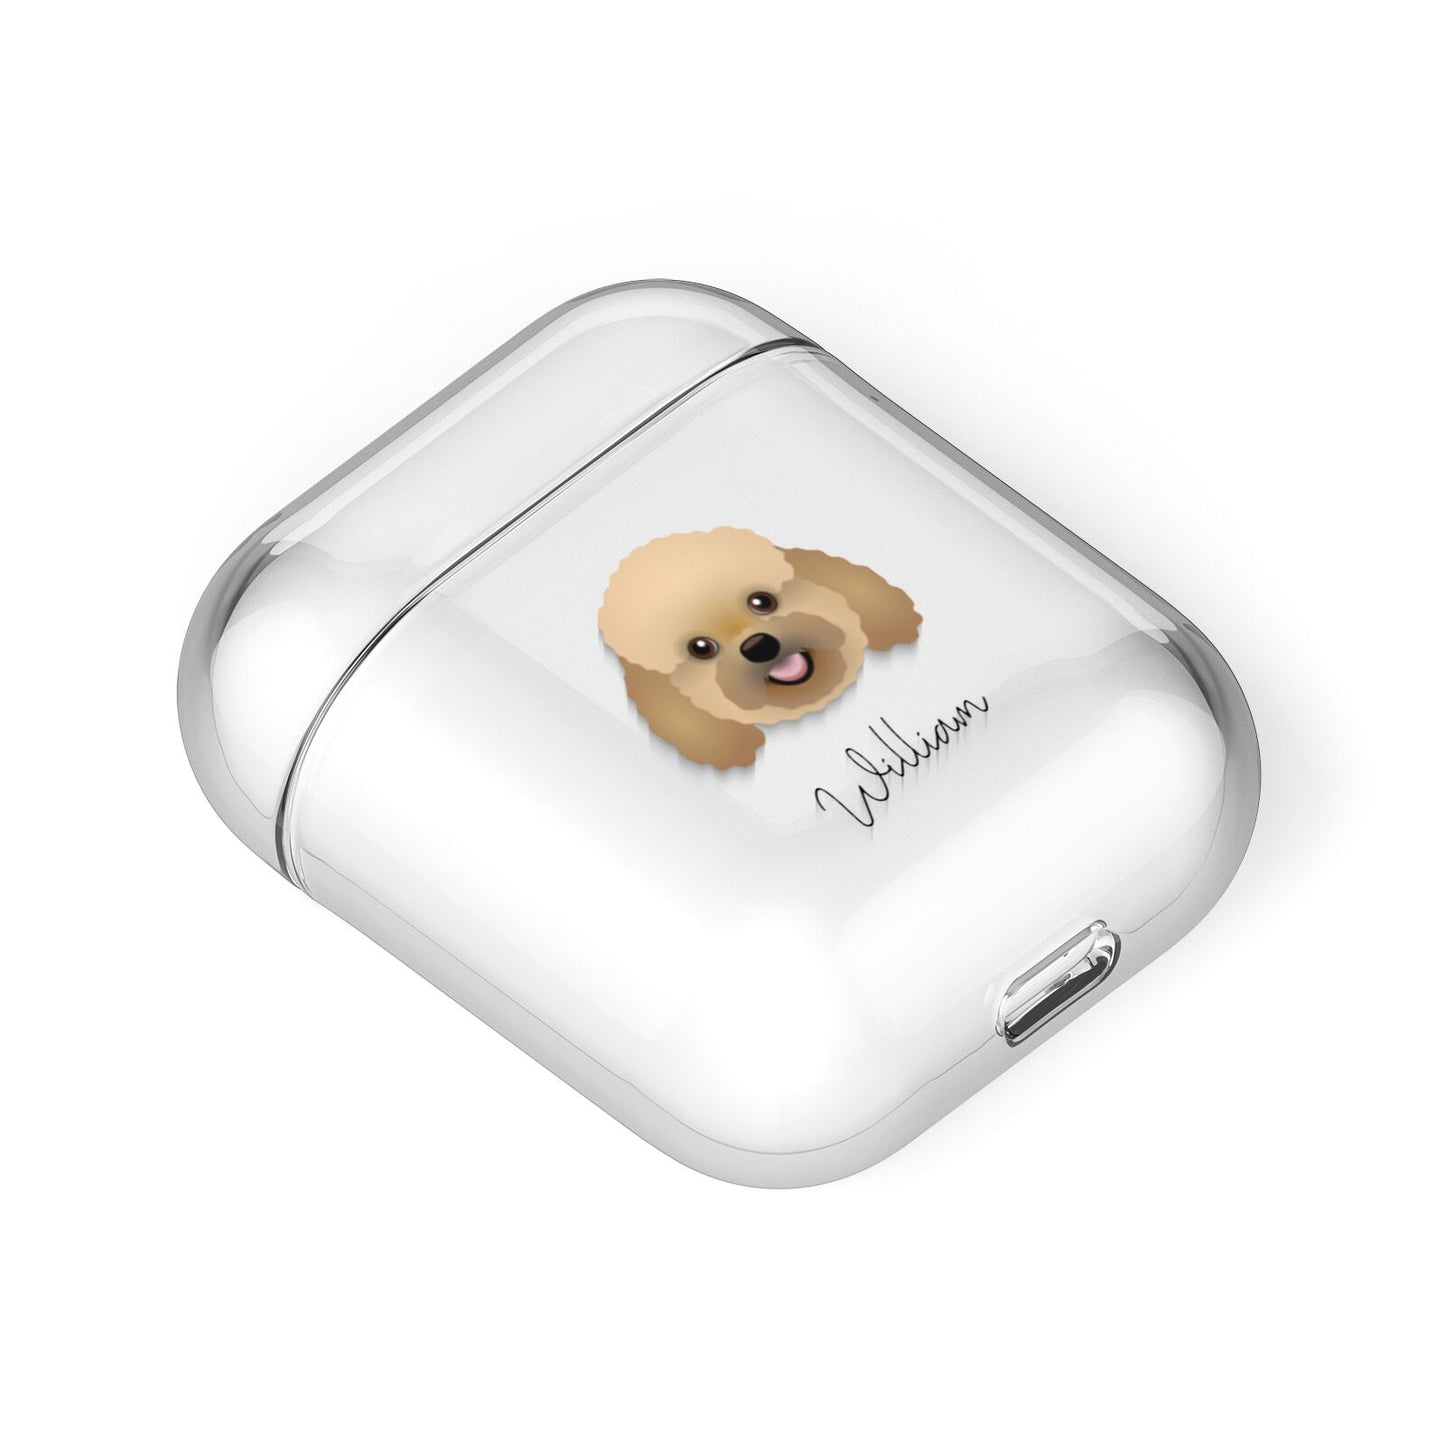 Bich poo Personalised AirPods Case Laid Flat